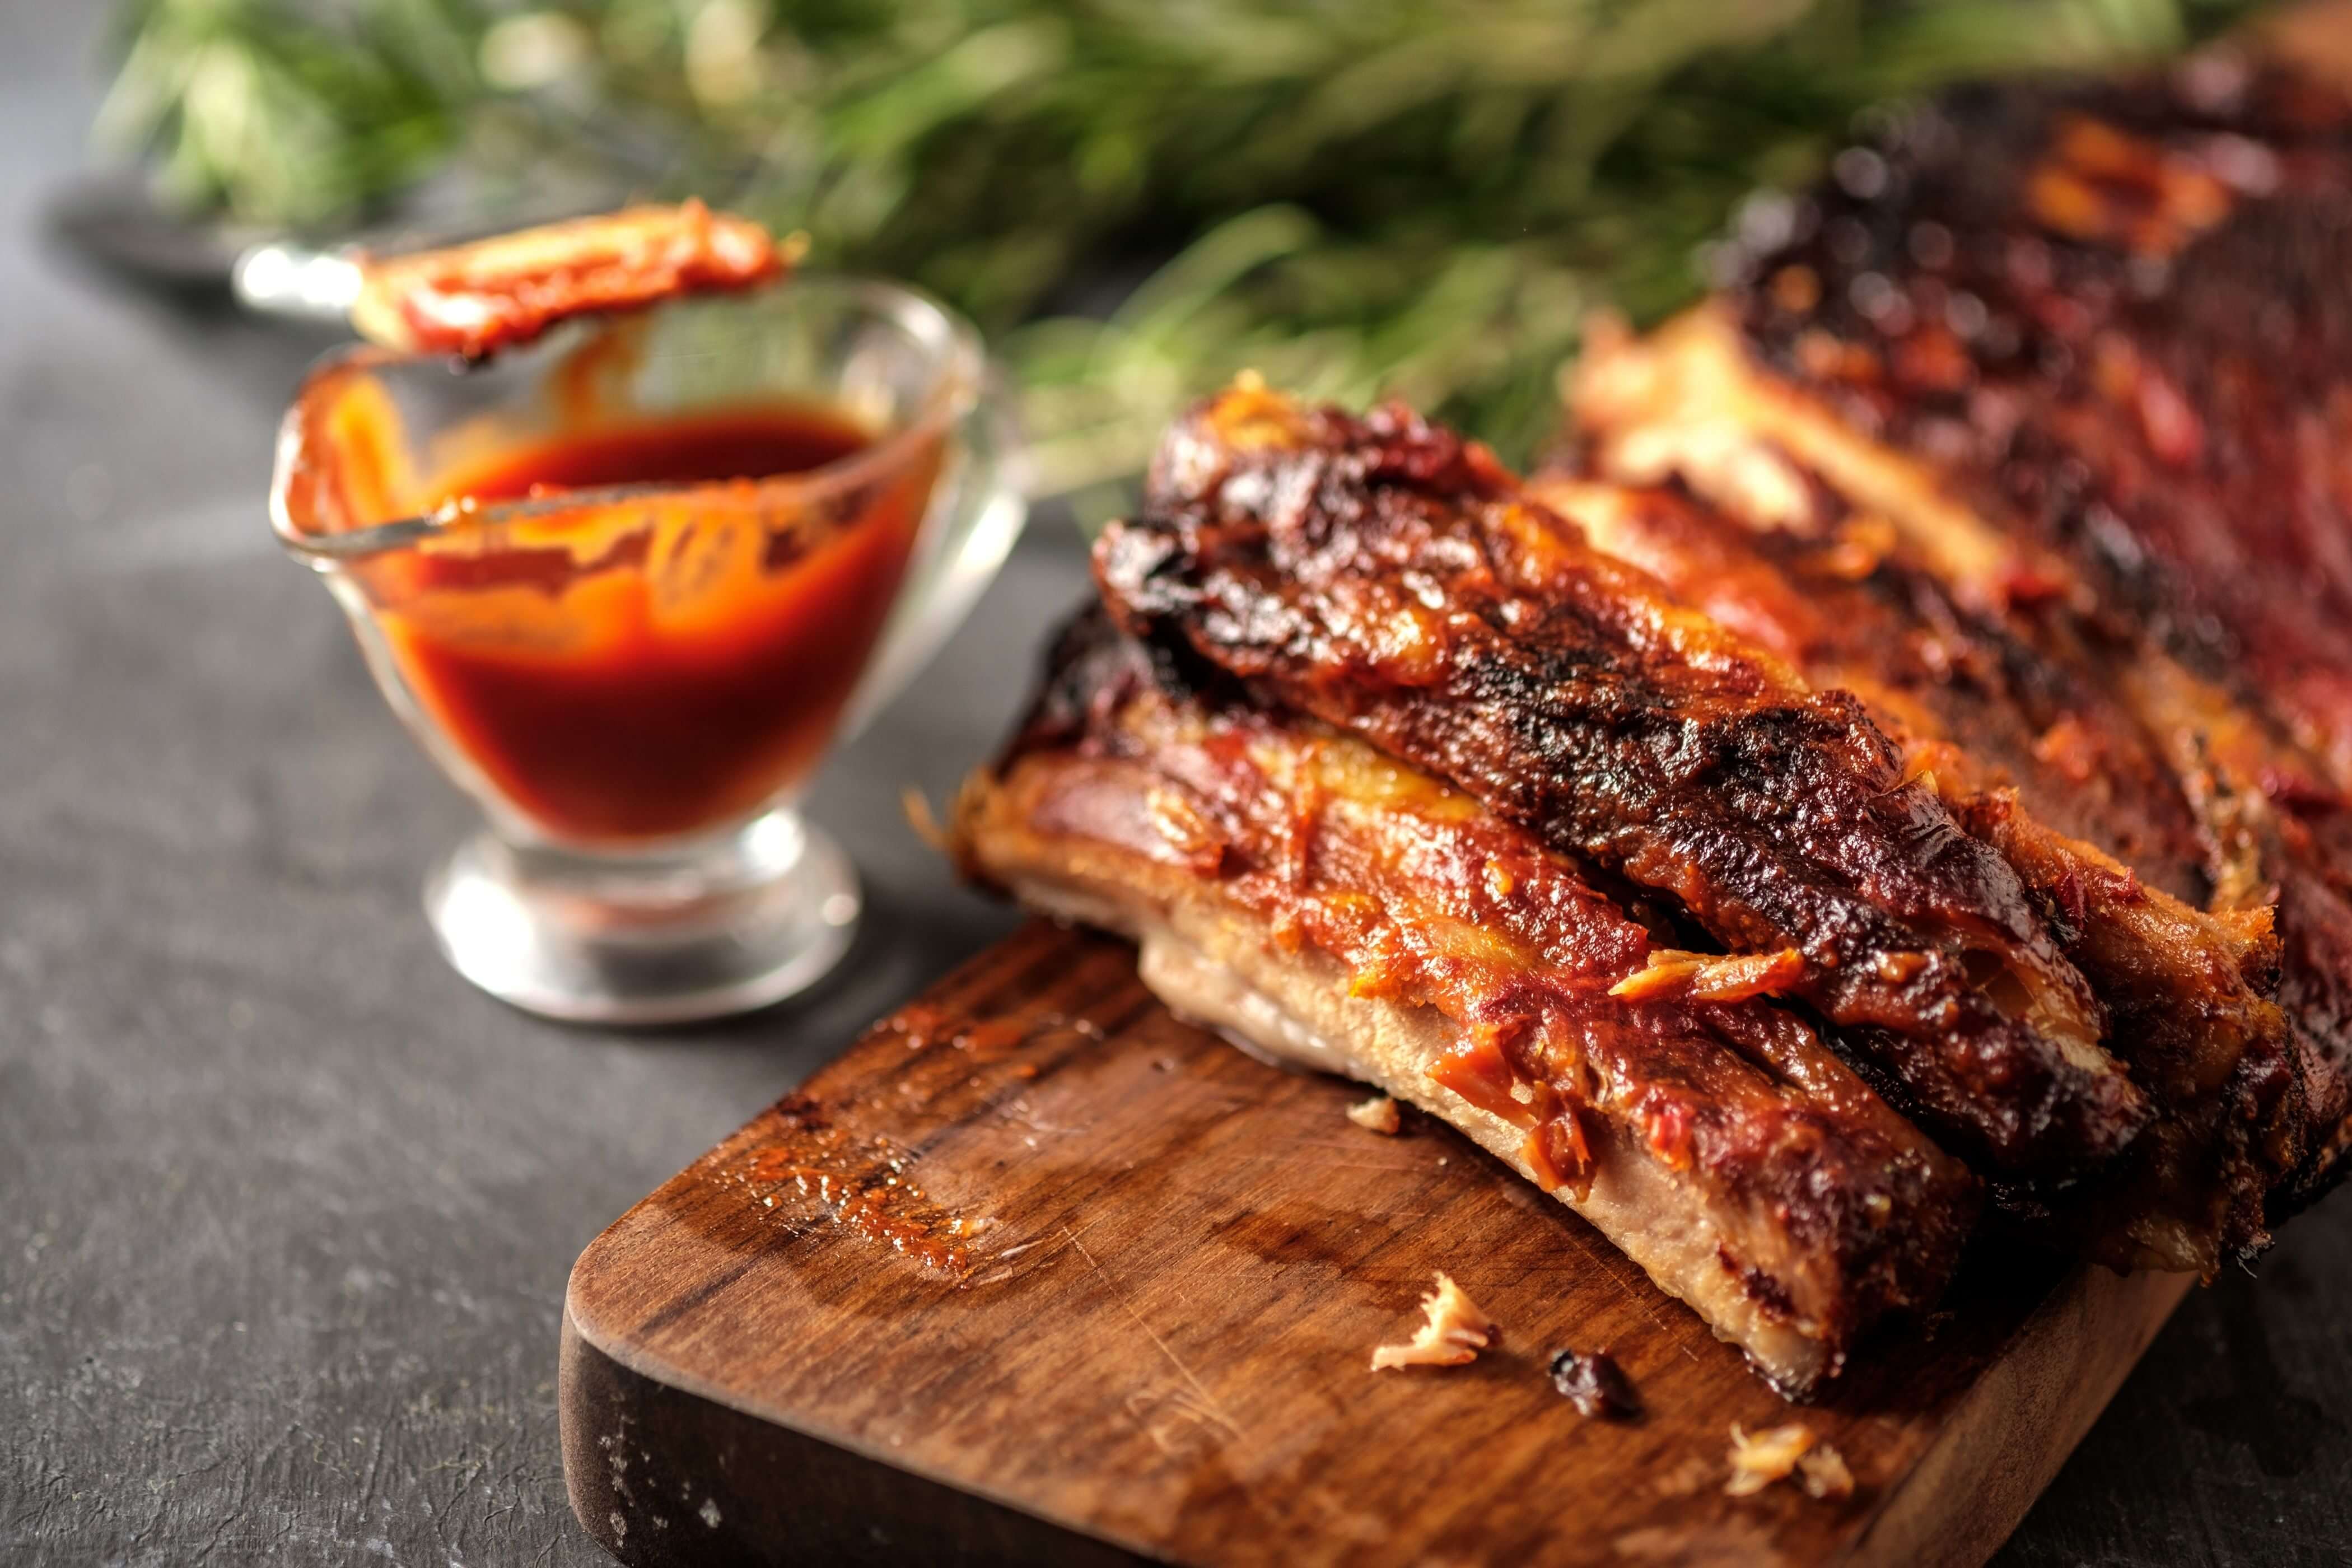 Barbecue ribs on a wooden cutting board. Glass with barbecue sauce to the left.